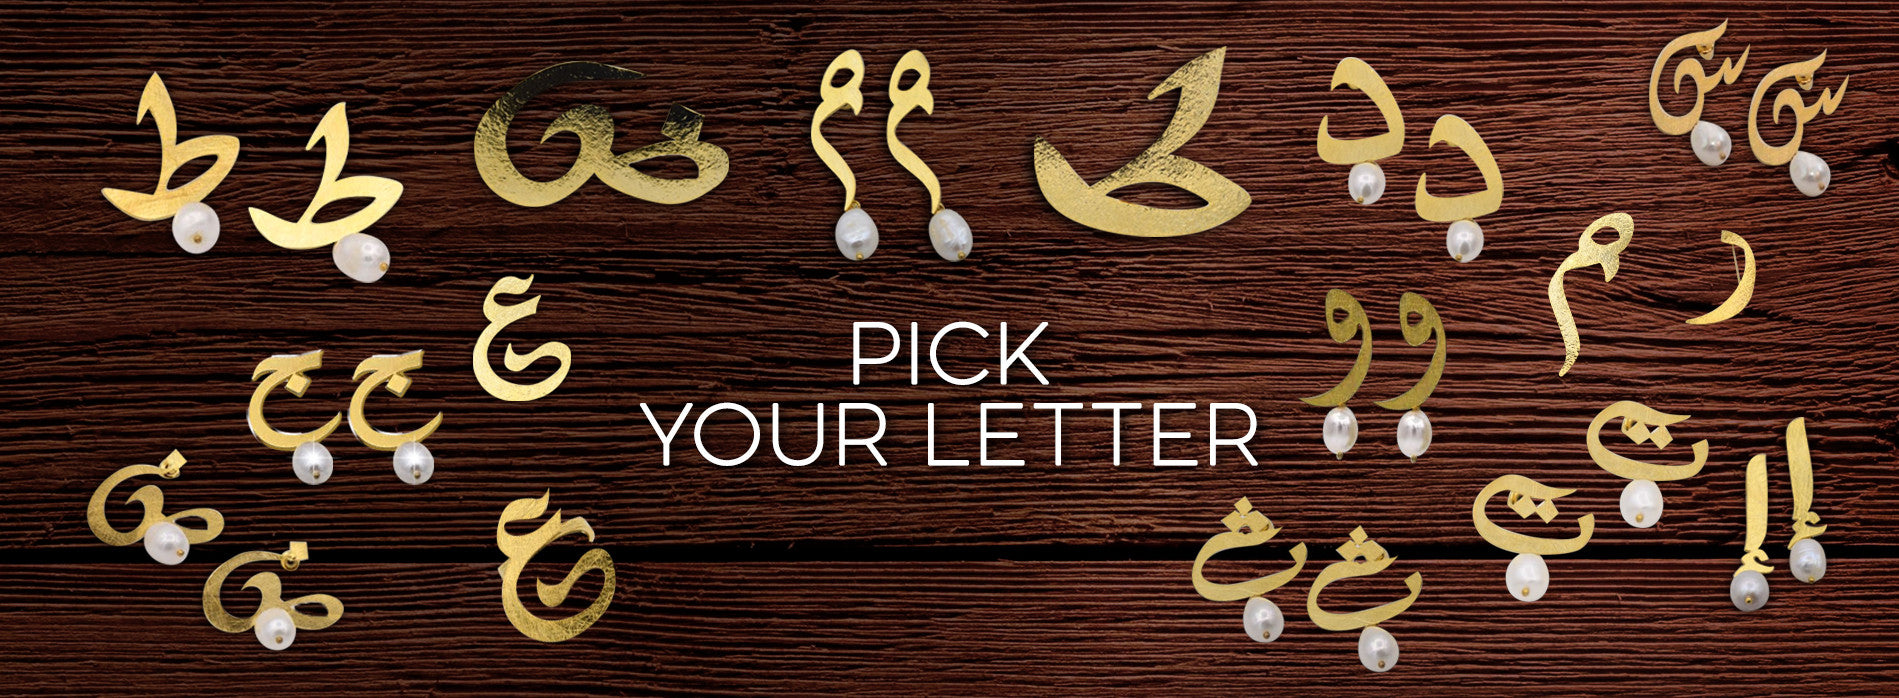 Find Your Letter